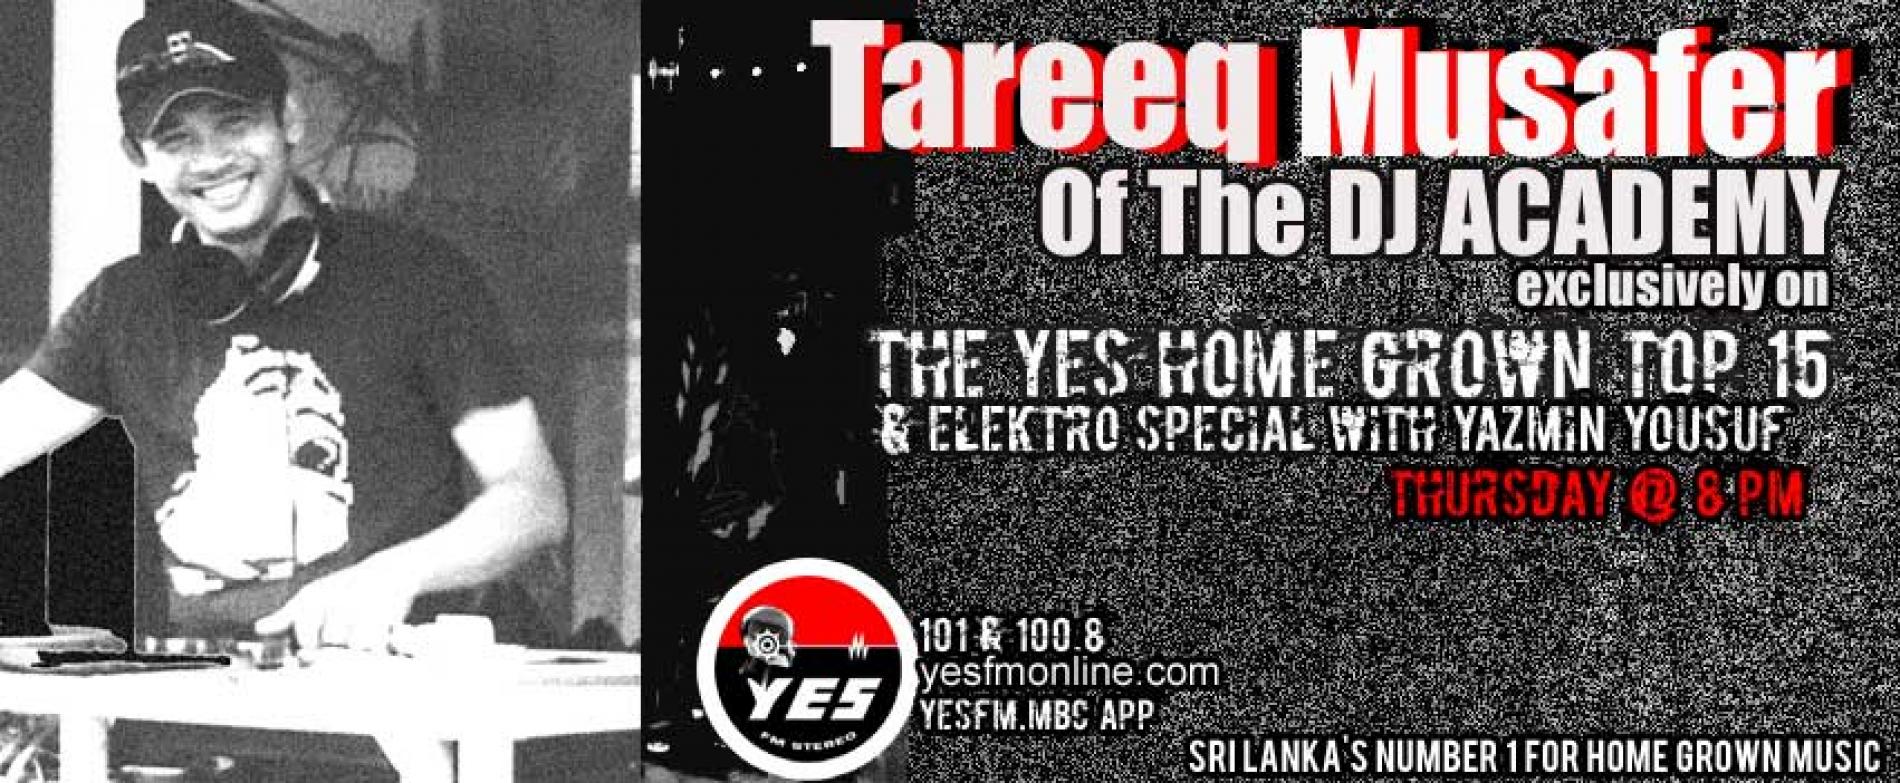 Tareeq Of The Dj Academy On The YES Home Grown Top 15